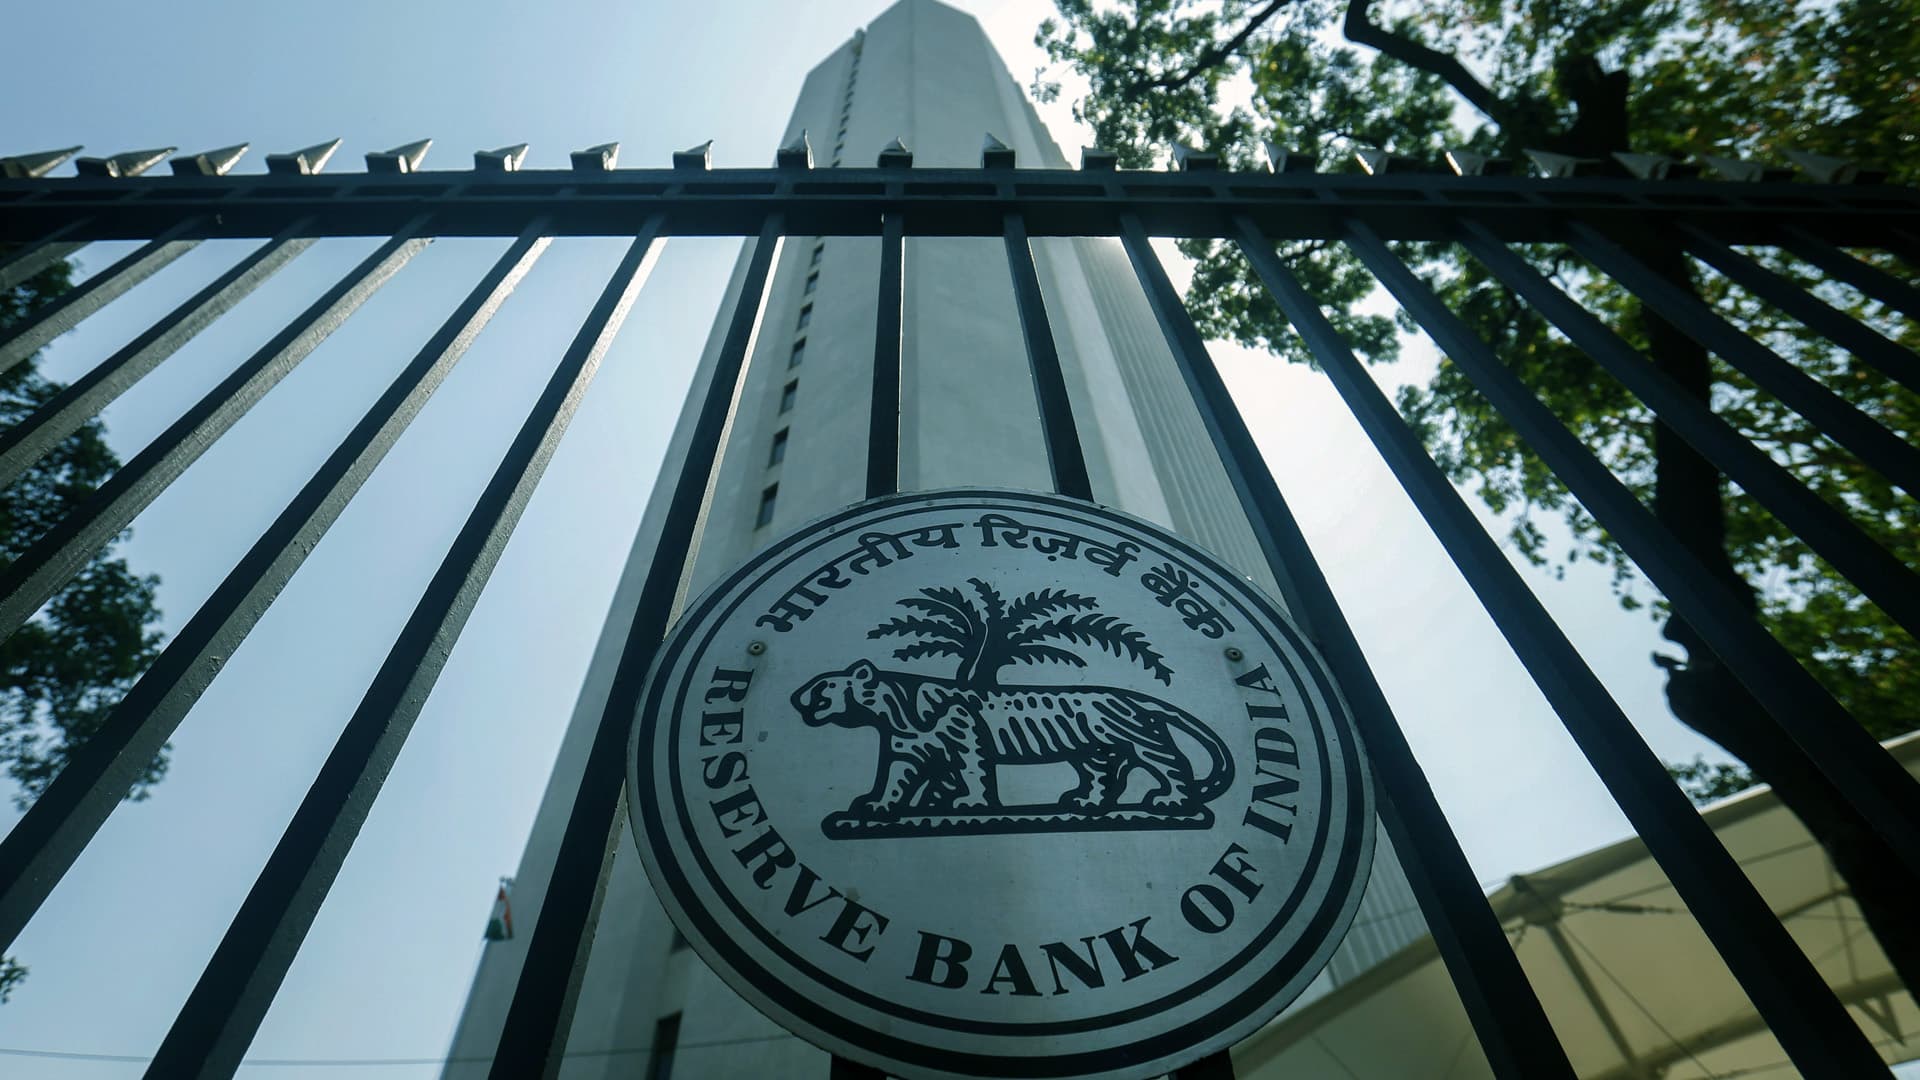 Macro data, RBI policy to drive markets this week, say analysts